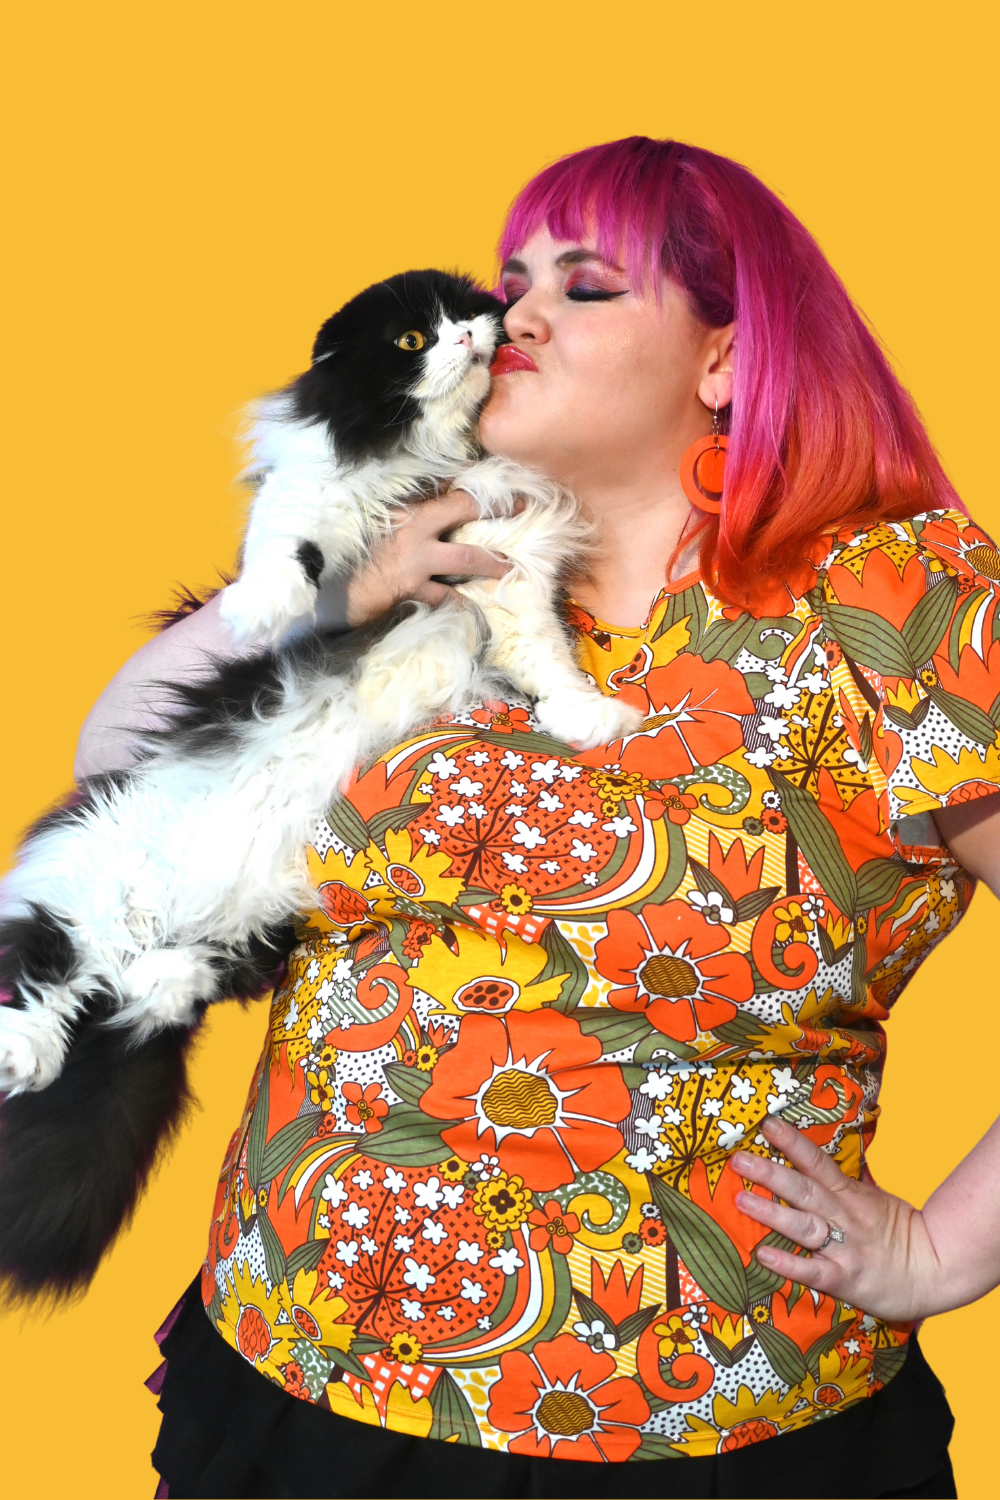 Pink-haired girl with cat wearing bright colored tee with large floral print